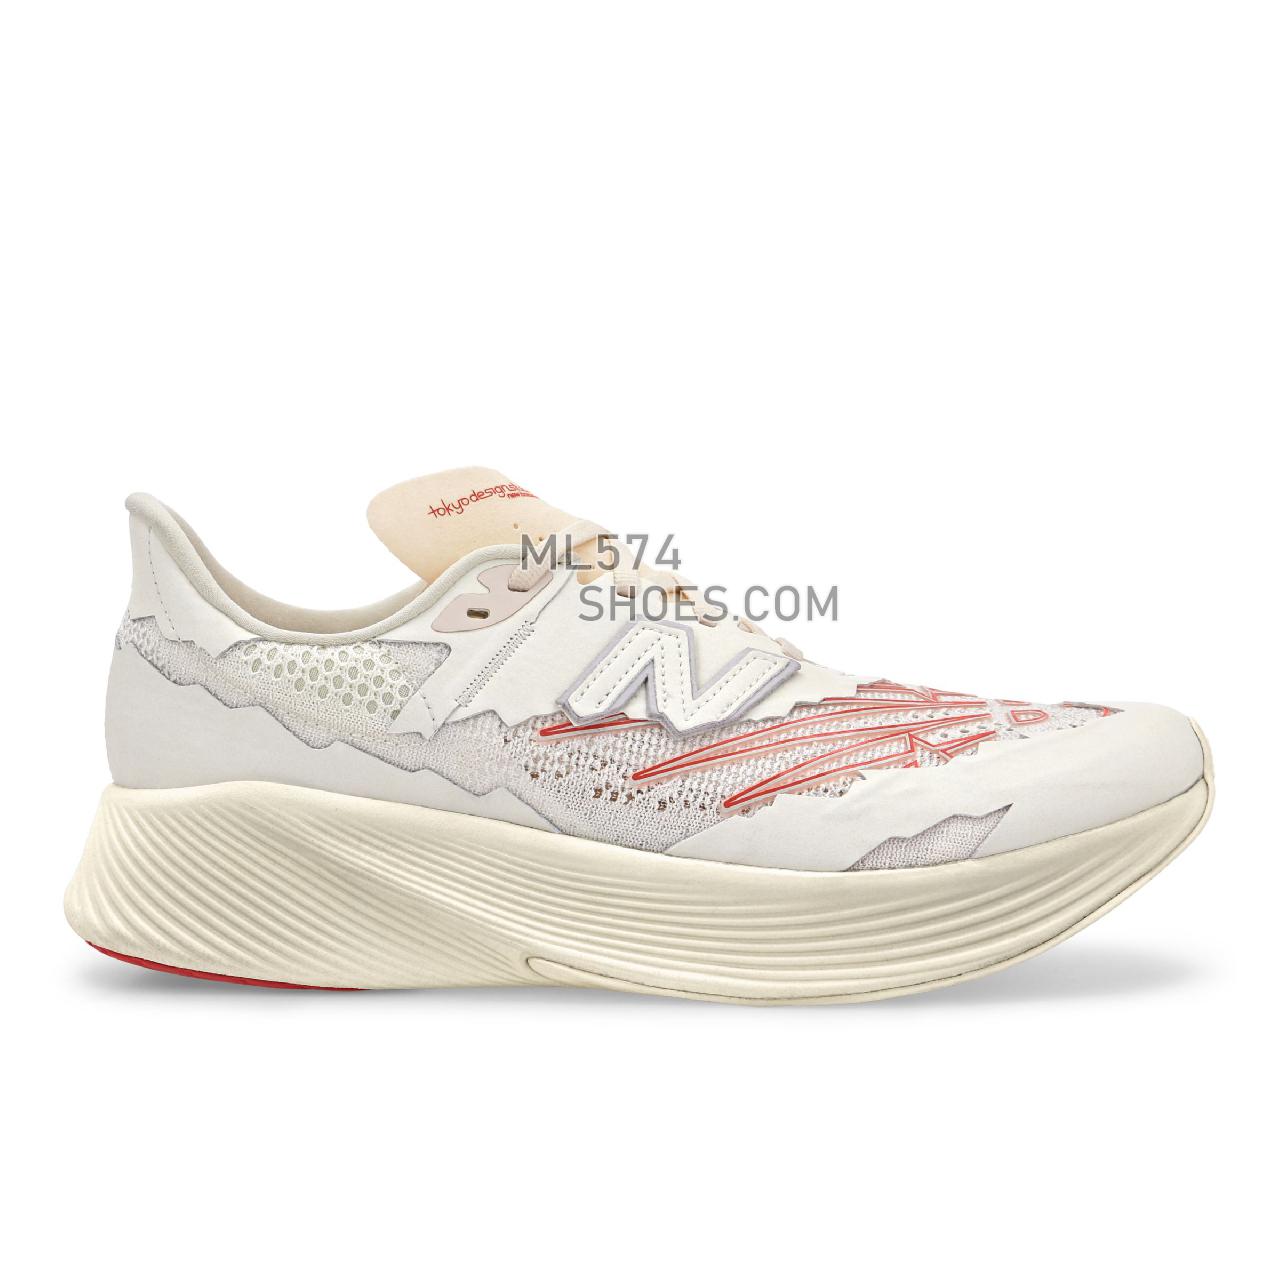 New Balance Stone Island Tokyo Design Studio FuelCell RC Elite V2 - Men's Competition Running - Angora with Mars Red - MSRCELTD